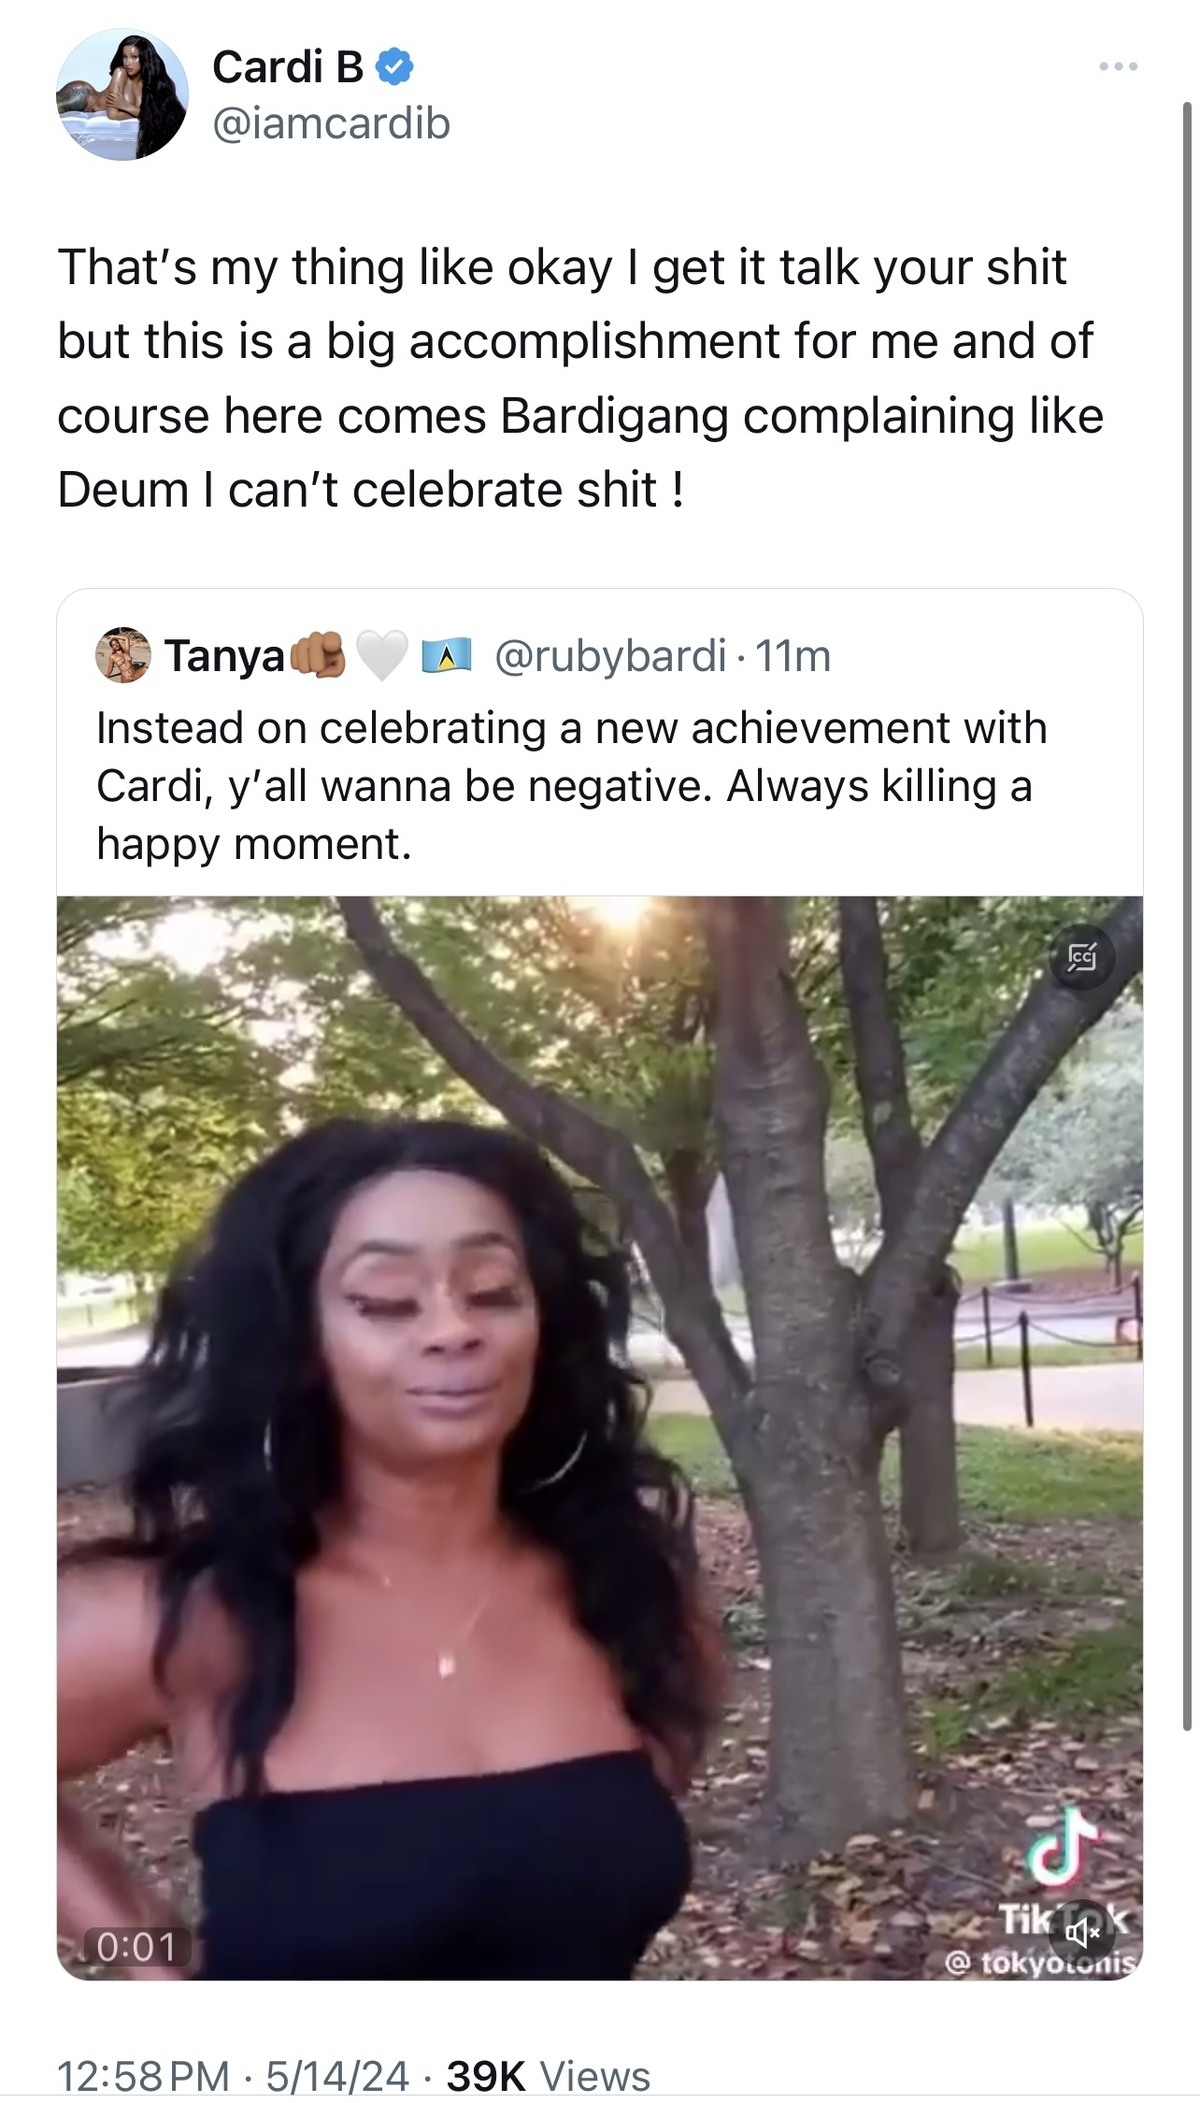 Cardi B in a video expressing frustration with a negative comment on a celebratory post